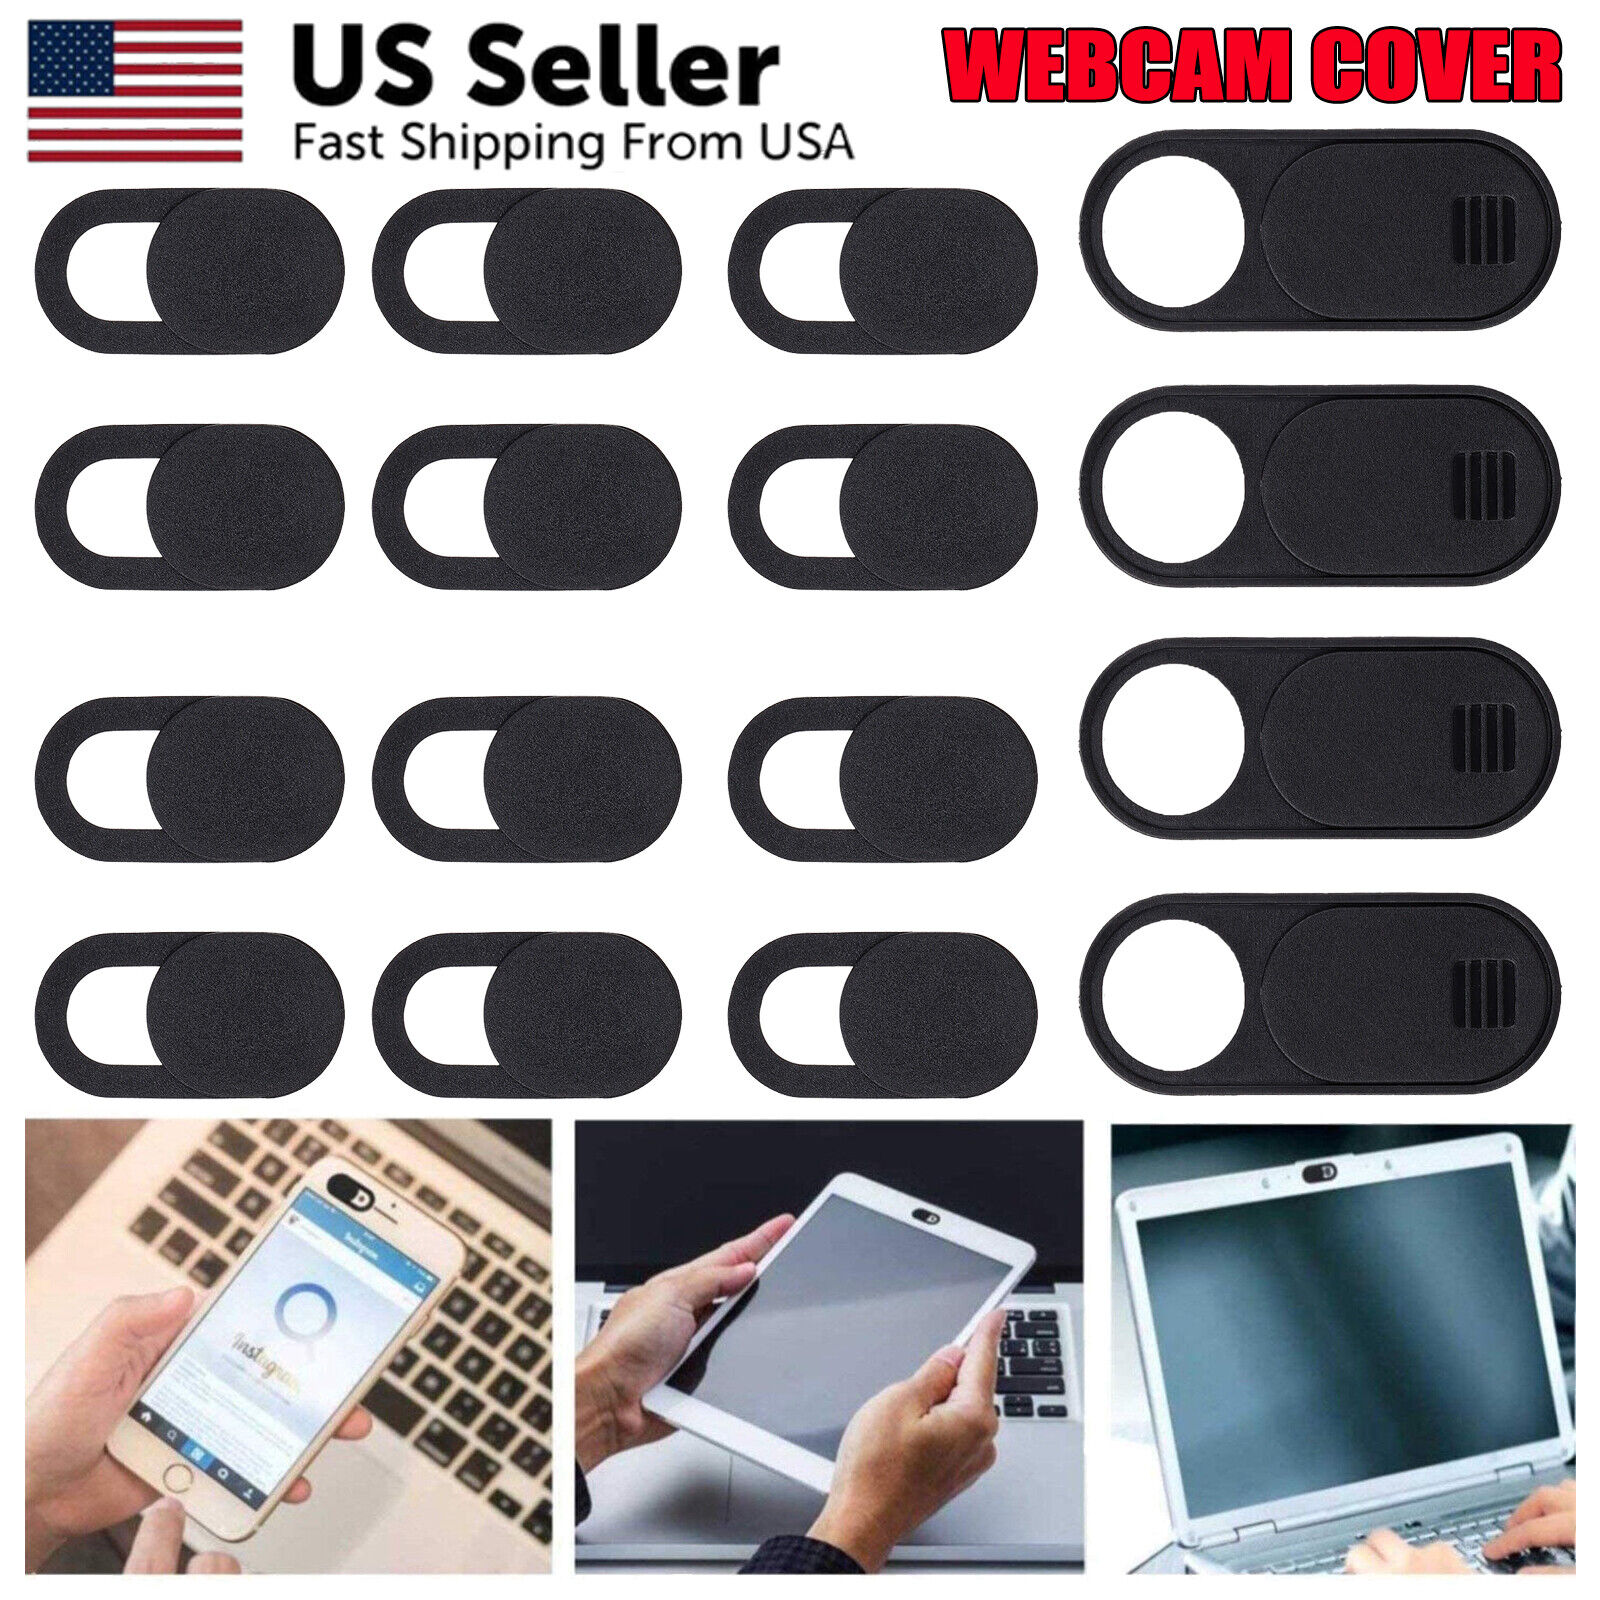 16 X WebCam Cover Slide Camera Privacy Security Protect Sticker For Phone Laptop